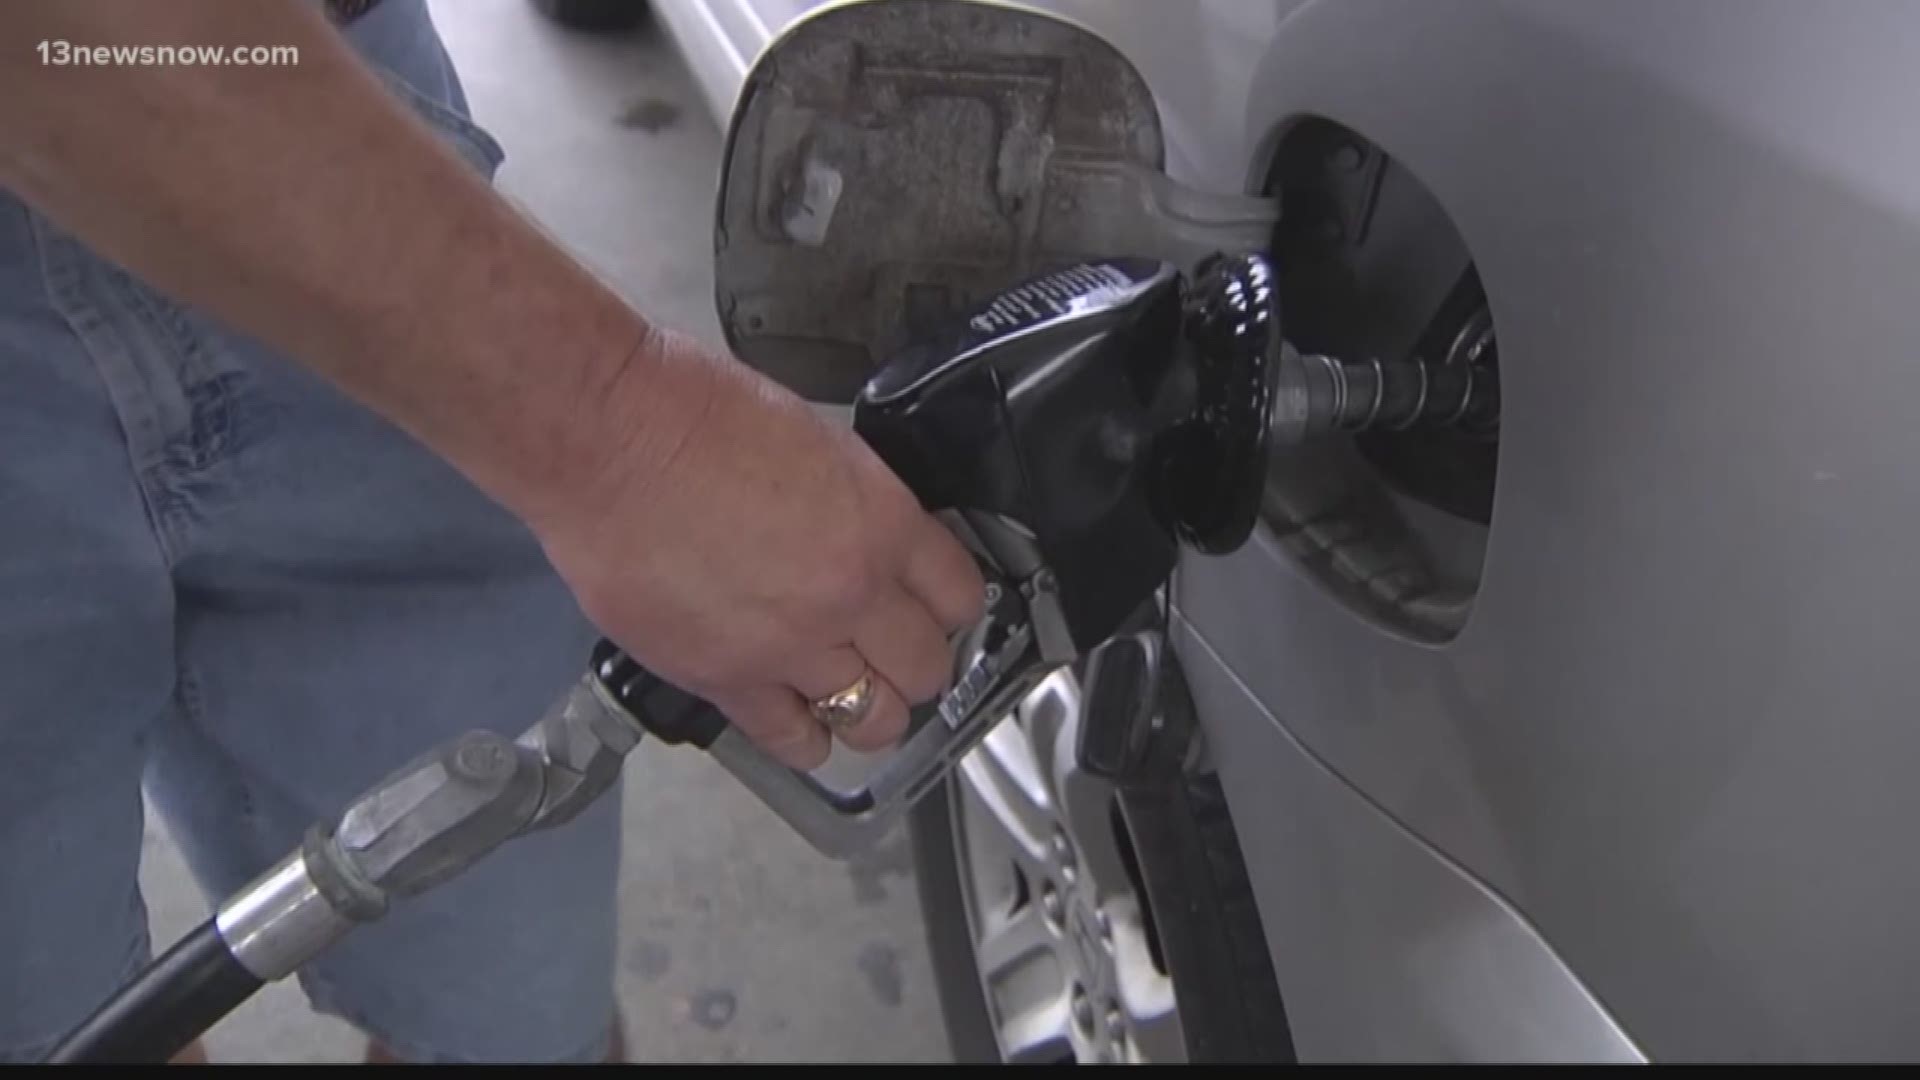 A viewer asked our Verify team if filling up with higher octane gas is worth it.